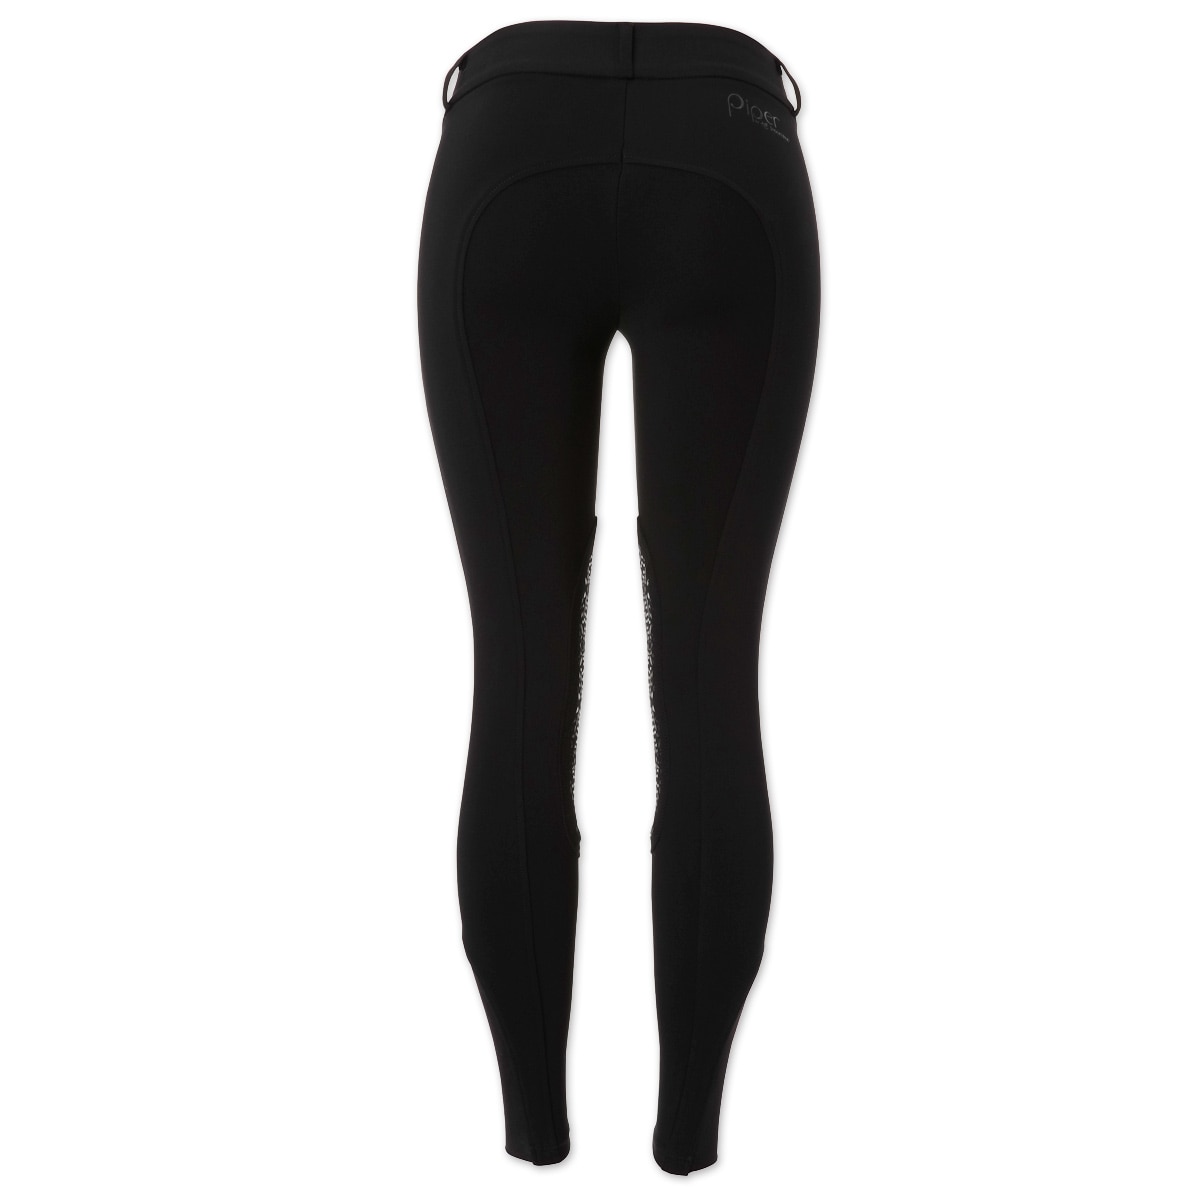 Piper Knit Breeches by SmartPak - Low Rise Knee Patch